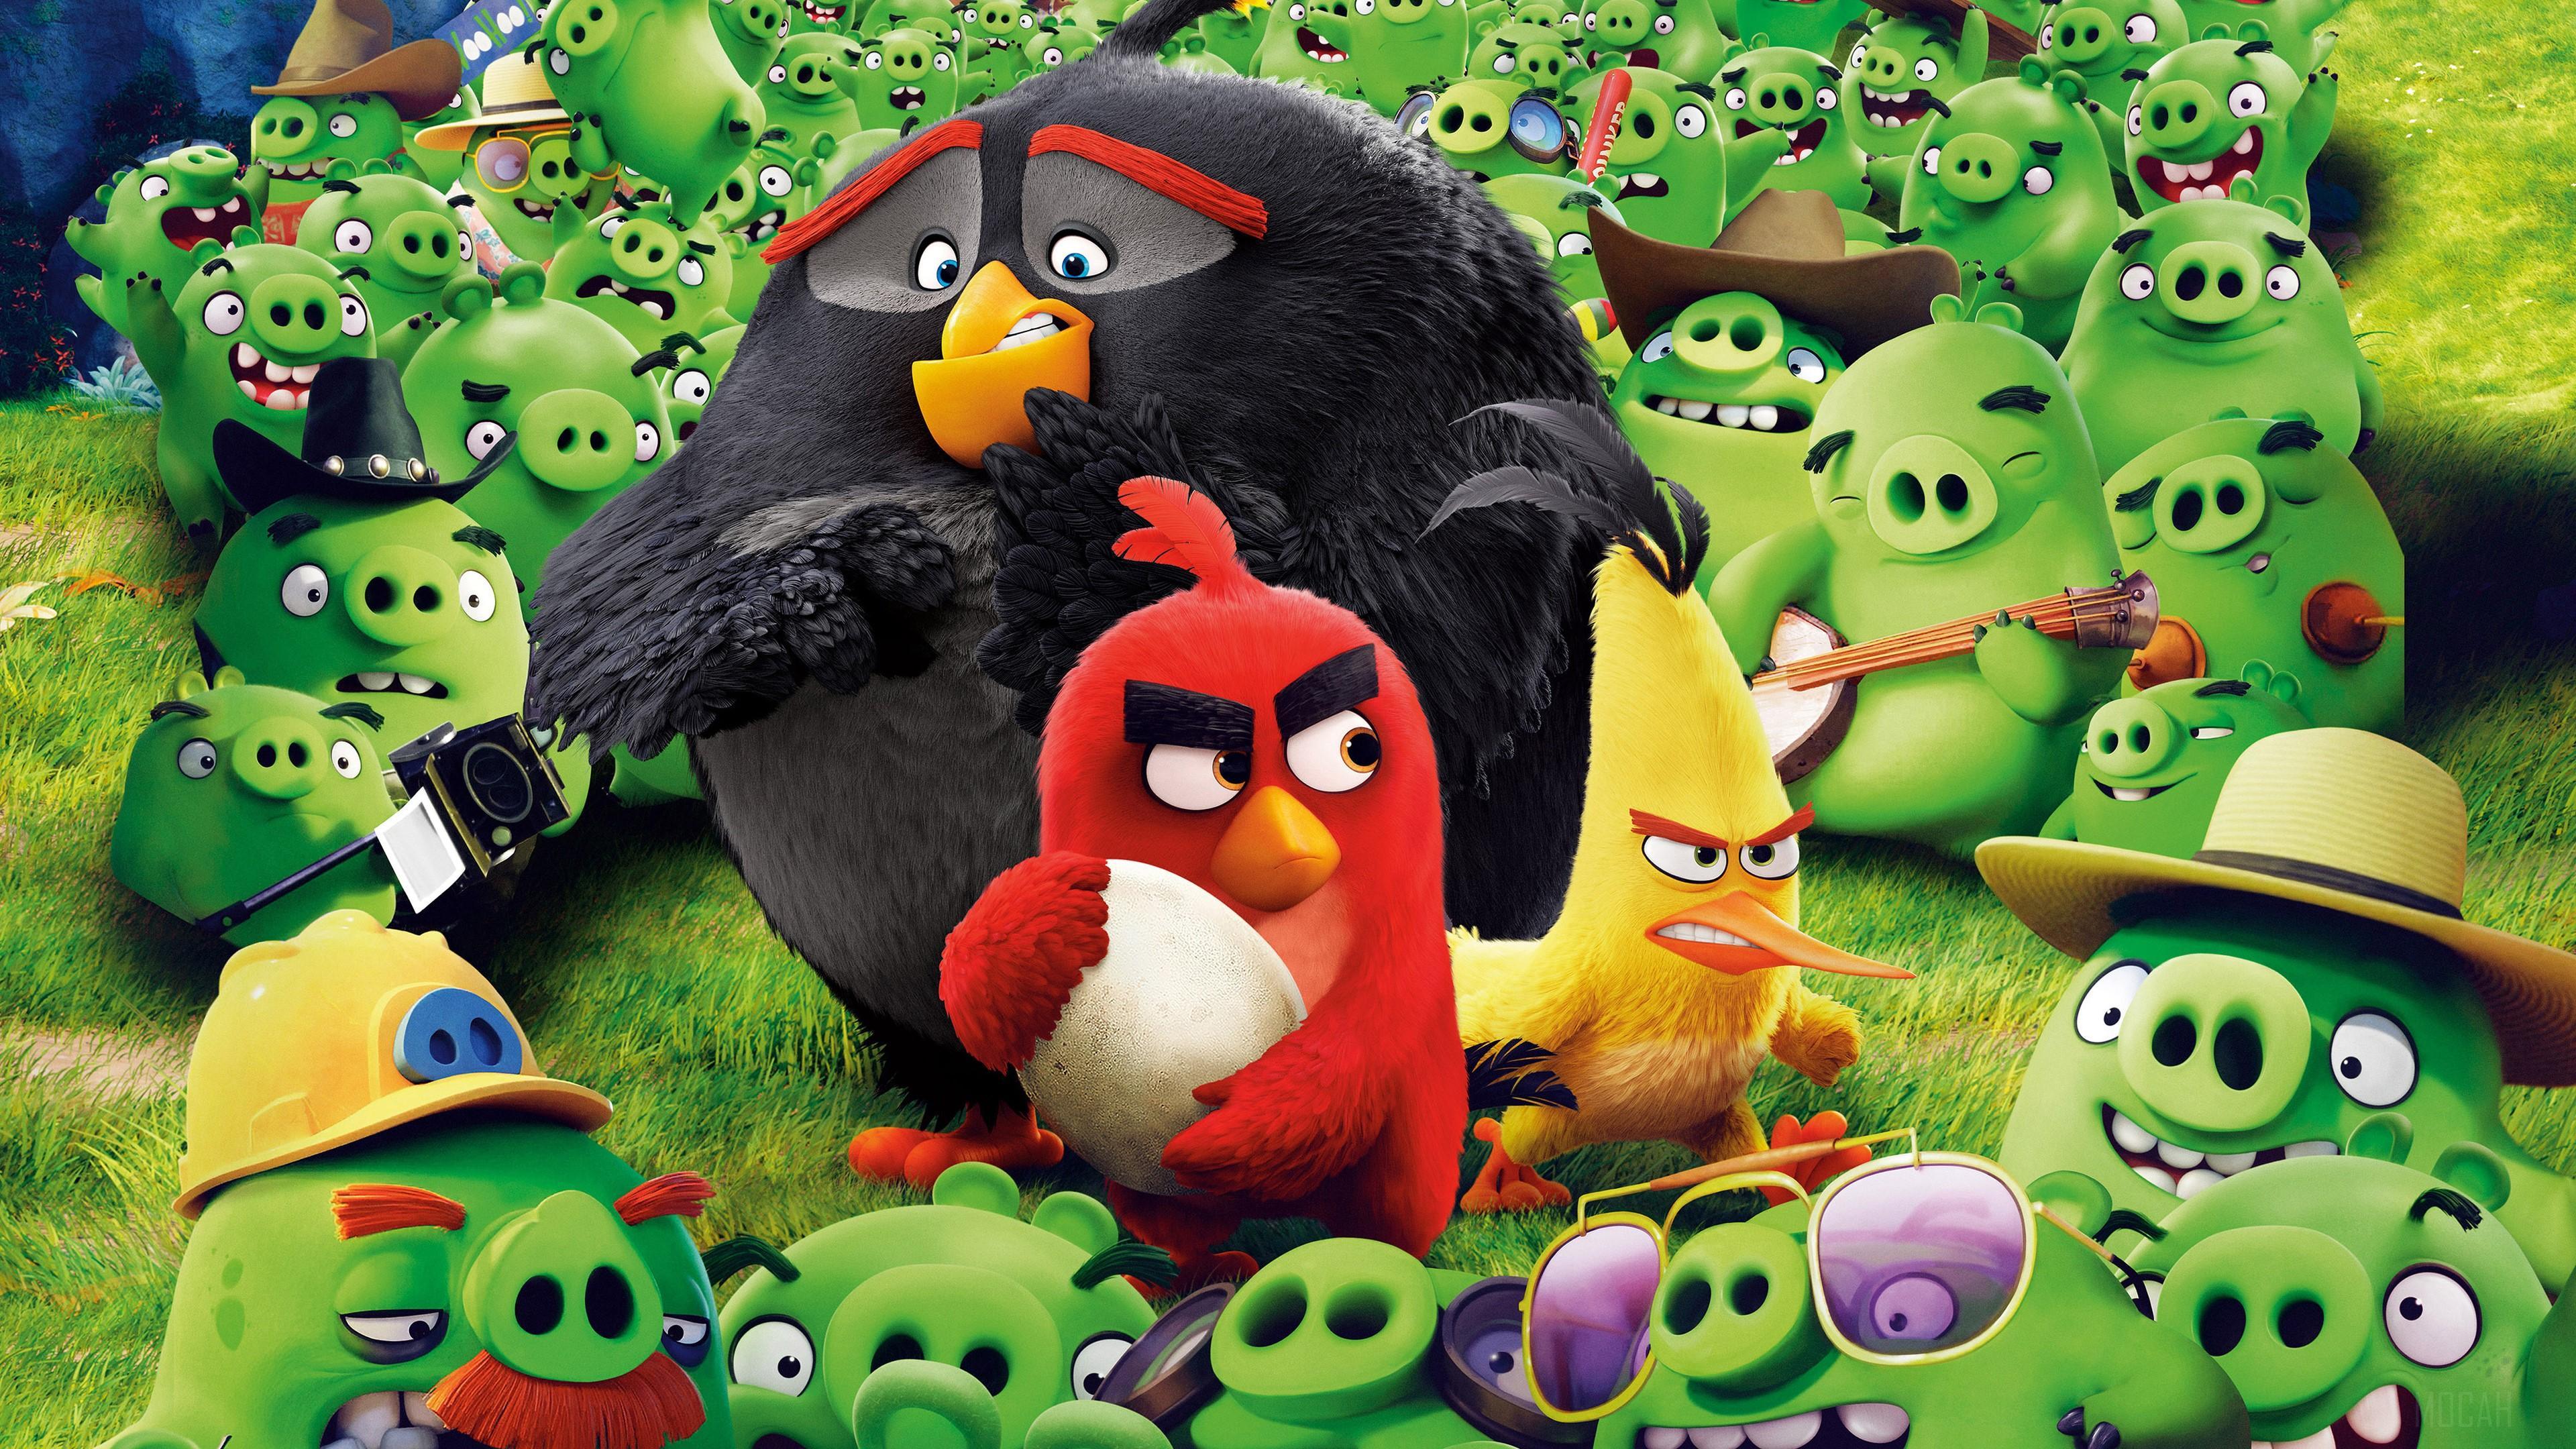 HD wallpaper, Angry Birds Save The Egg 4K